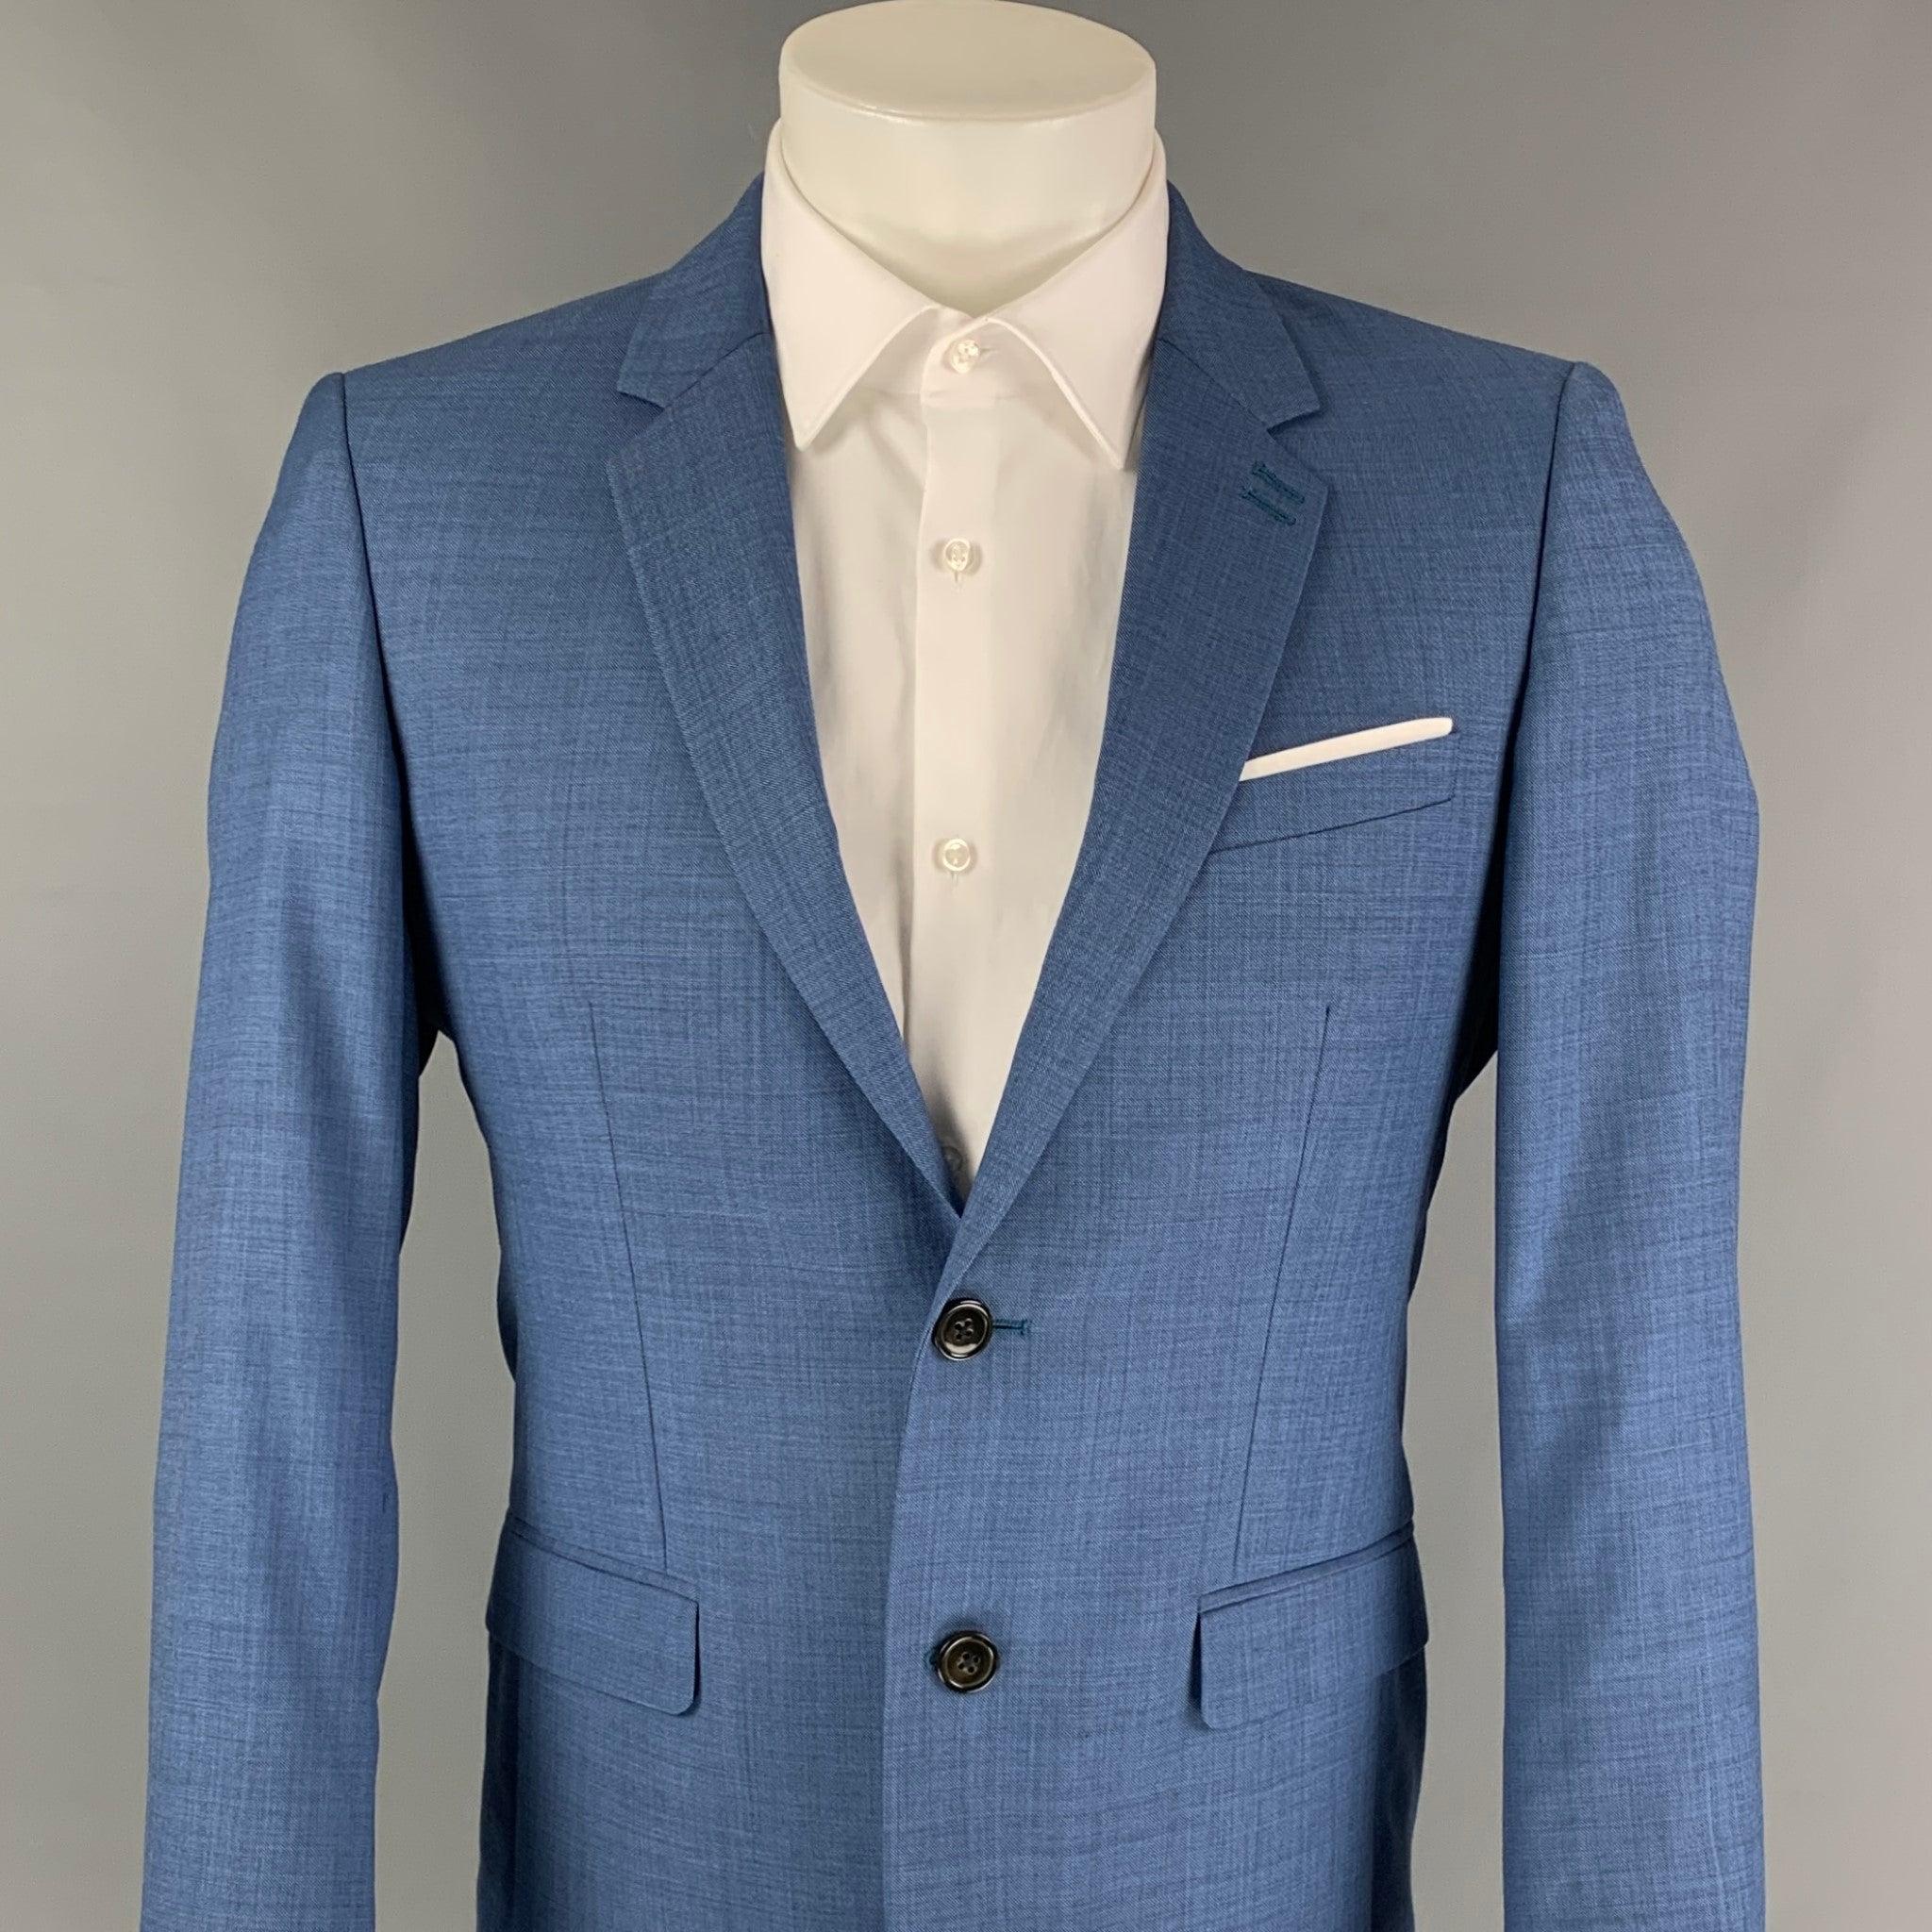 THE KOOPLES sport coat comes in a blue wool with a full liner featuring a notch lapel, flap pockets, and a double button closure.
Excellent
Pre-Owned Condition. 

Marked:   46 

Measurements: 
 
Shoulder: 17.5 inches Chest: 36 inches  Sleeve: 26.5